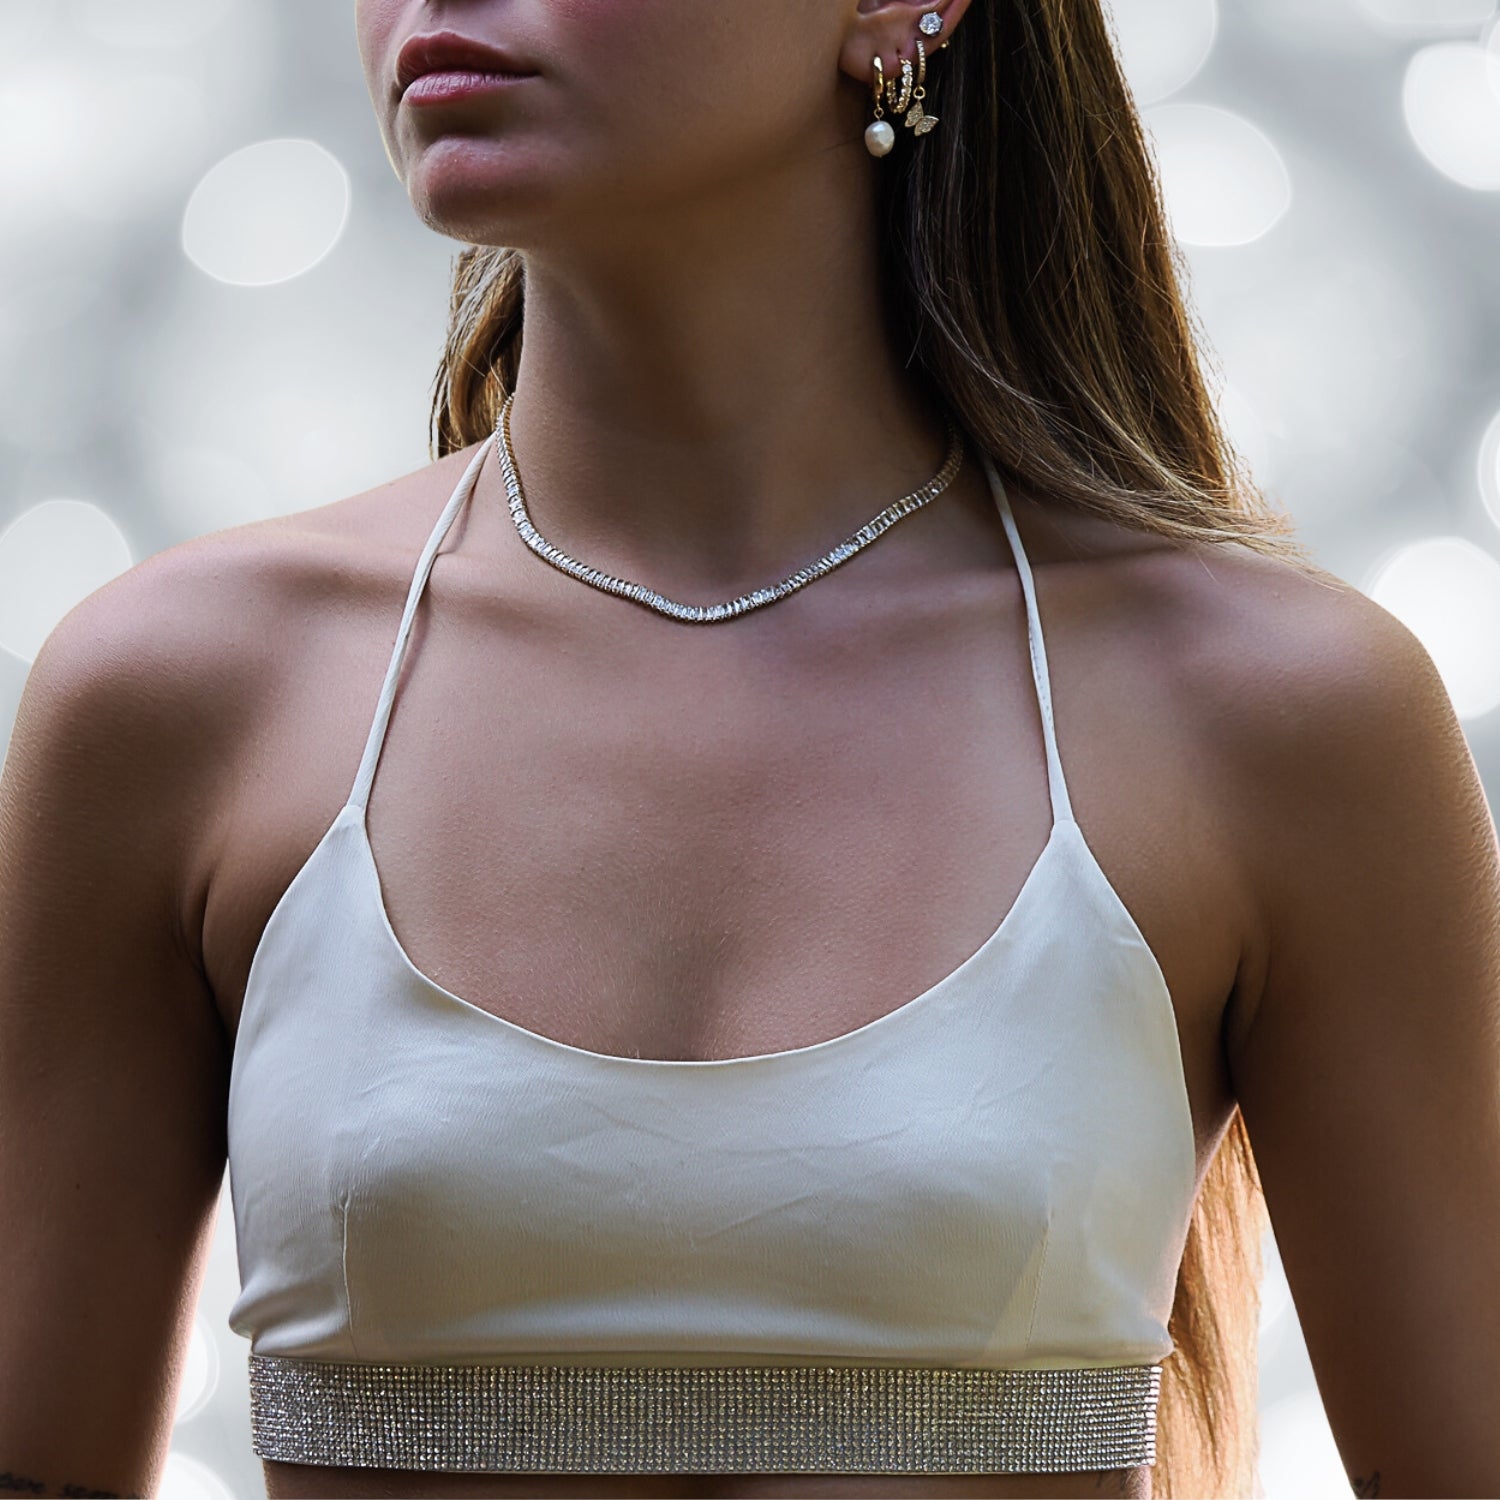 Model wearing the Baguette Diamond Gold Choker Necklace, showcasing its elegance and sophistication.